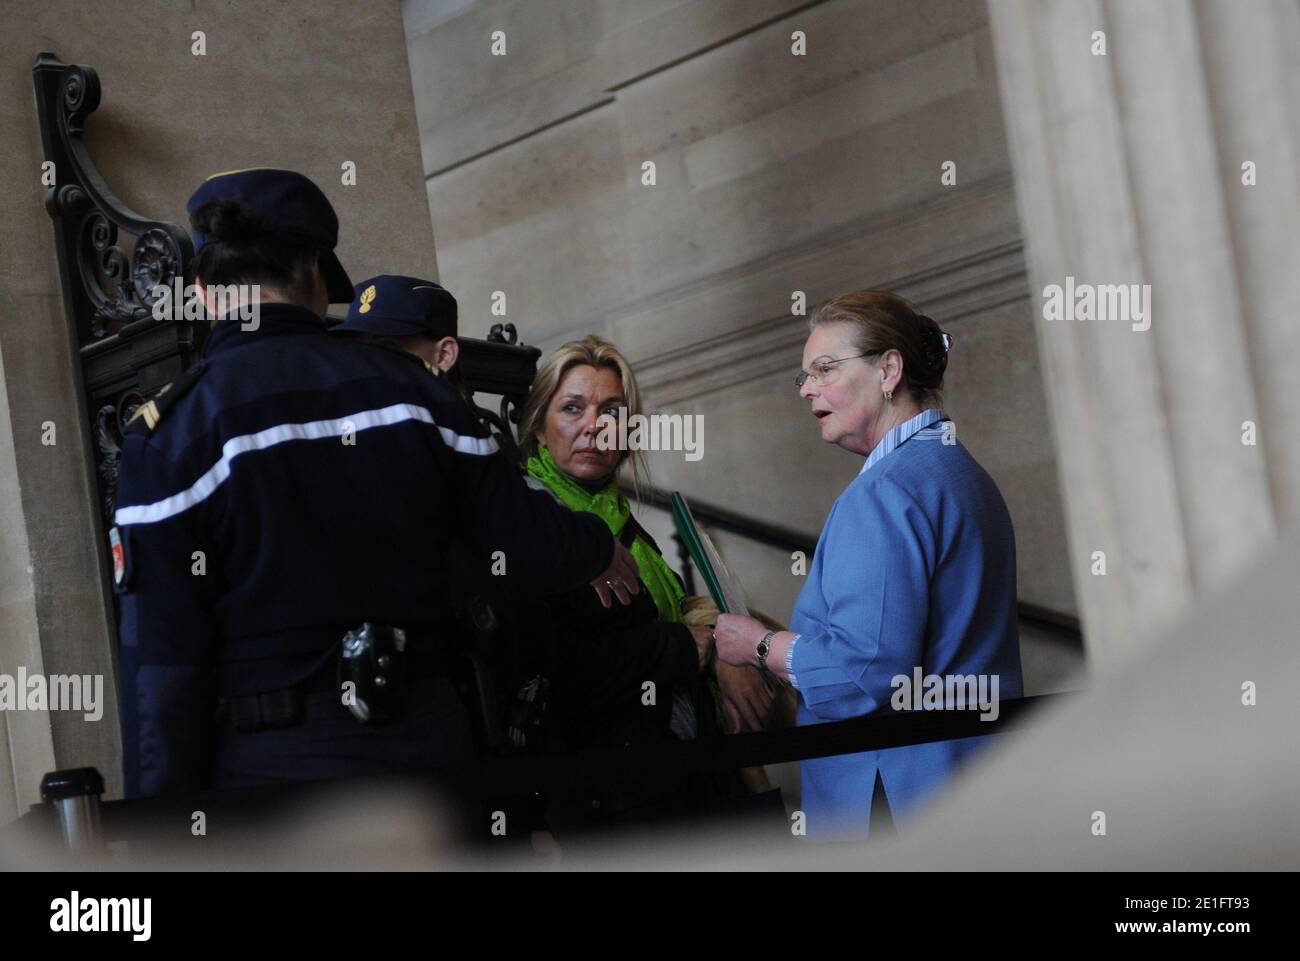 Diana Gunther (C), the daughter of German cardiologist Dieter Krombach, and Krombach's sister (R) at the Palais de Justice where they attended the second day of Krombach's trial for the murder of Kalinka Bamberski, in Paris, France on March 30, 2011. The French court today decided to continue the trial of the German doctor, who is accused of having raped and killed his then 14-year-old stepdaughter, Kalinka Bamberski, in the summer of 1982 while she was holidaying with her mother at Krombach's home at Lake Constance, southern Germany. A court in Germany ruled that Krombach could not be held re Stock Photo